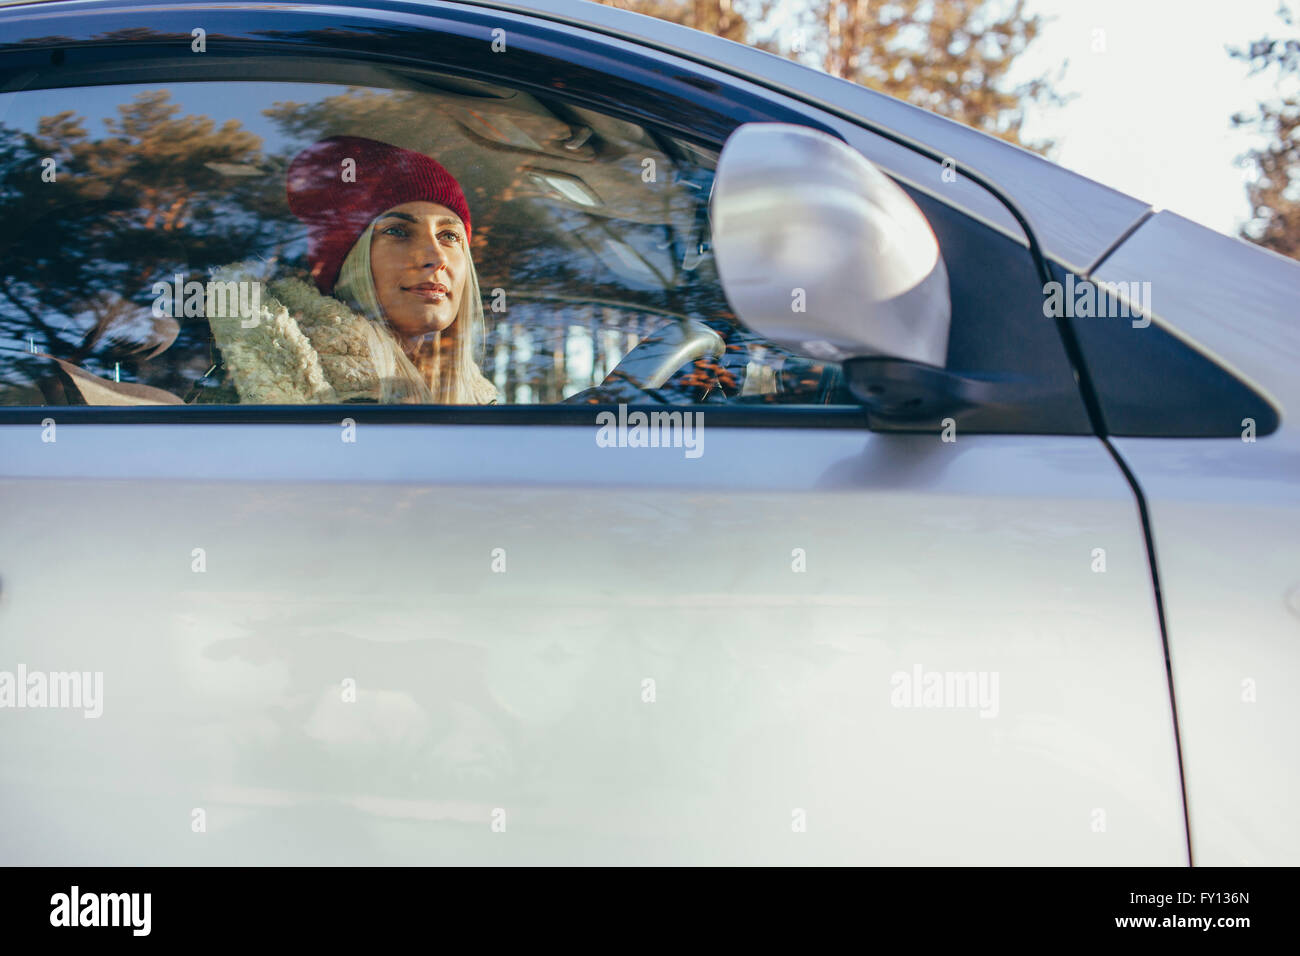 Low angle view of woman driving car pendant l'hiver Banque D'Images